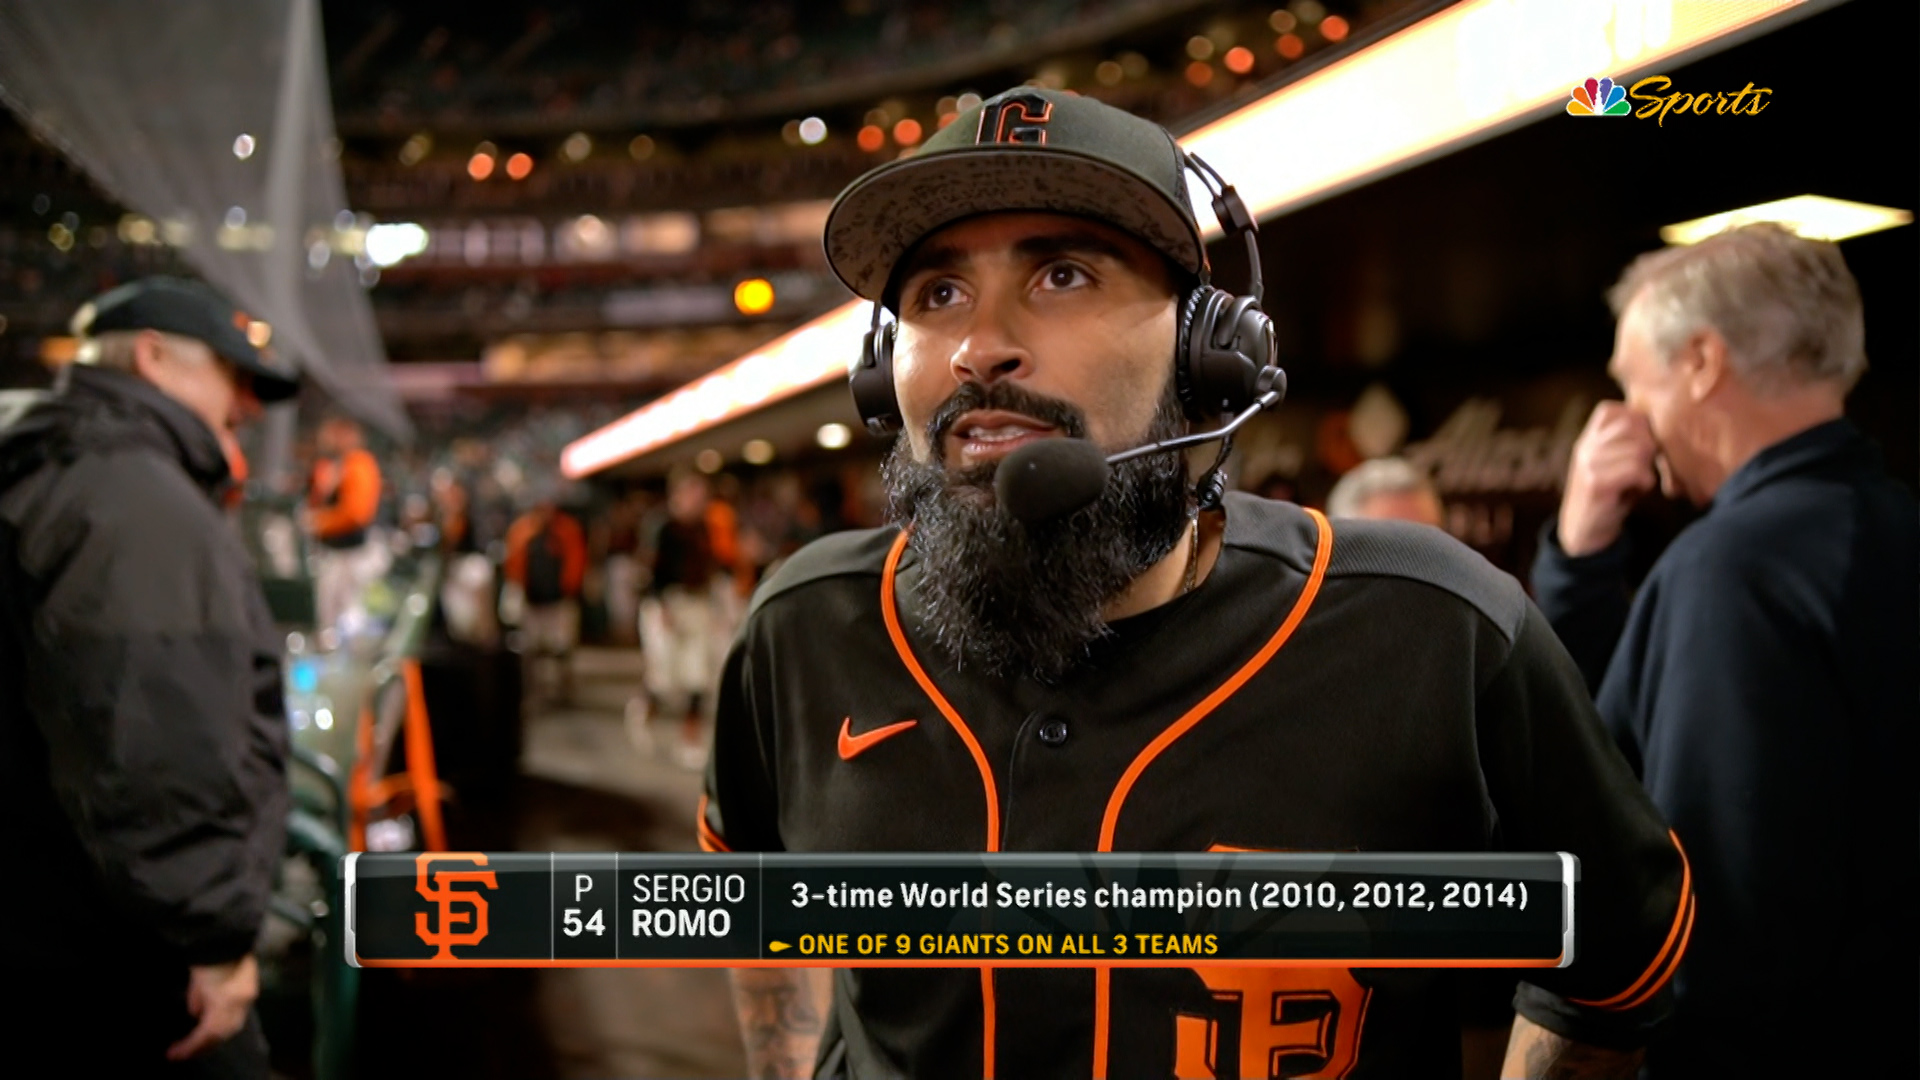 That's What's Up: New Twins Pitcher Sergio Romo's Best Moments